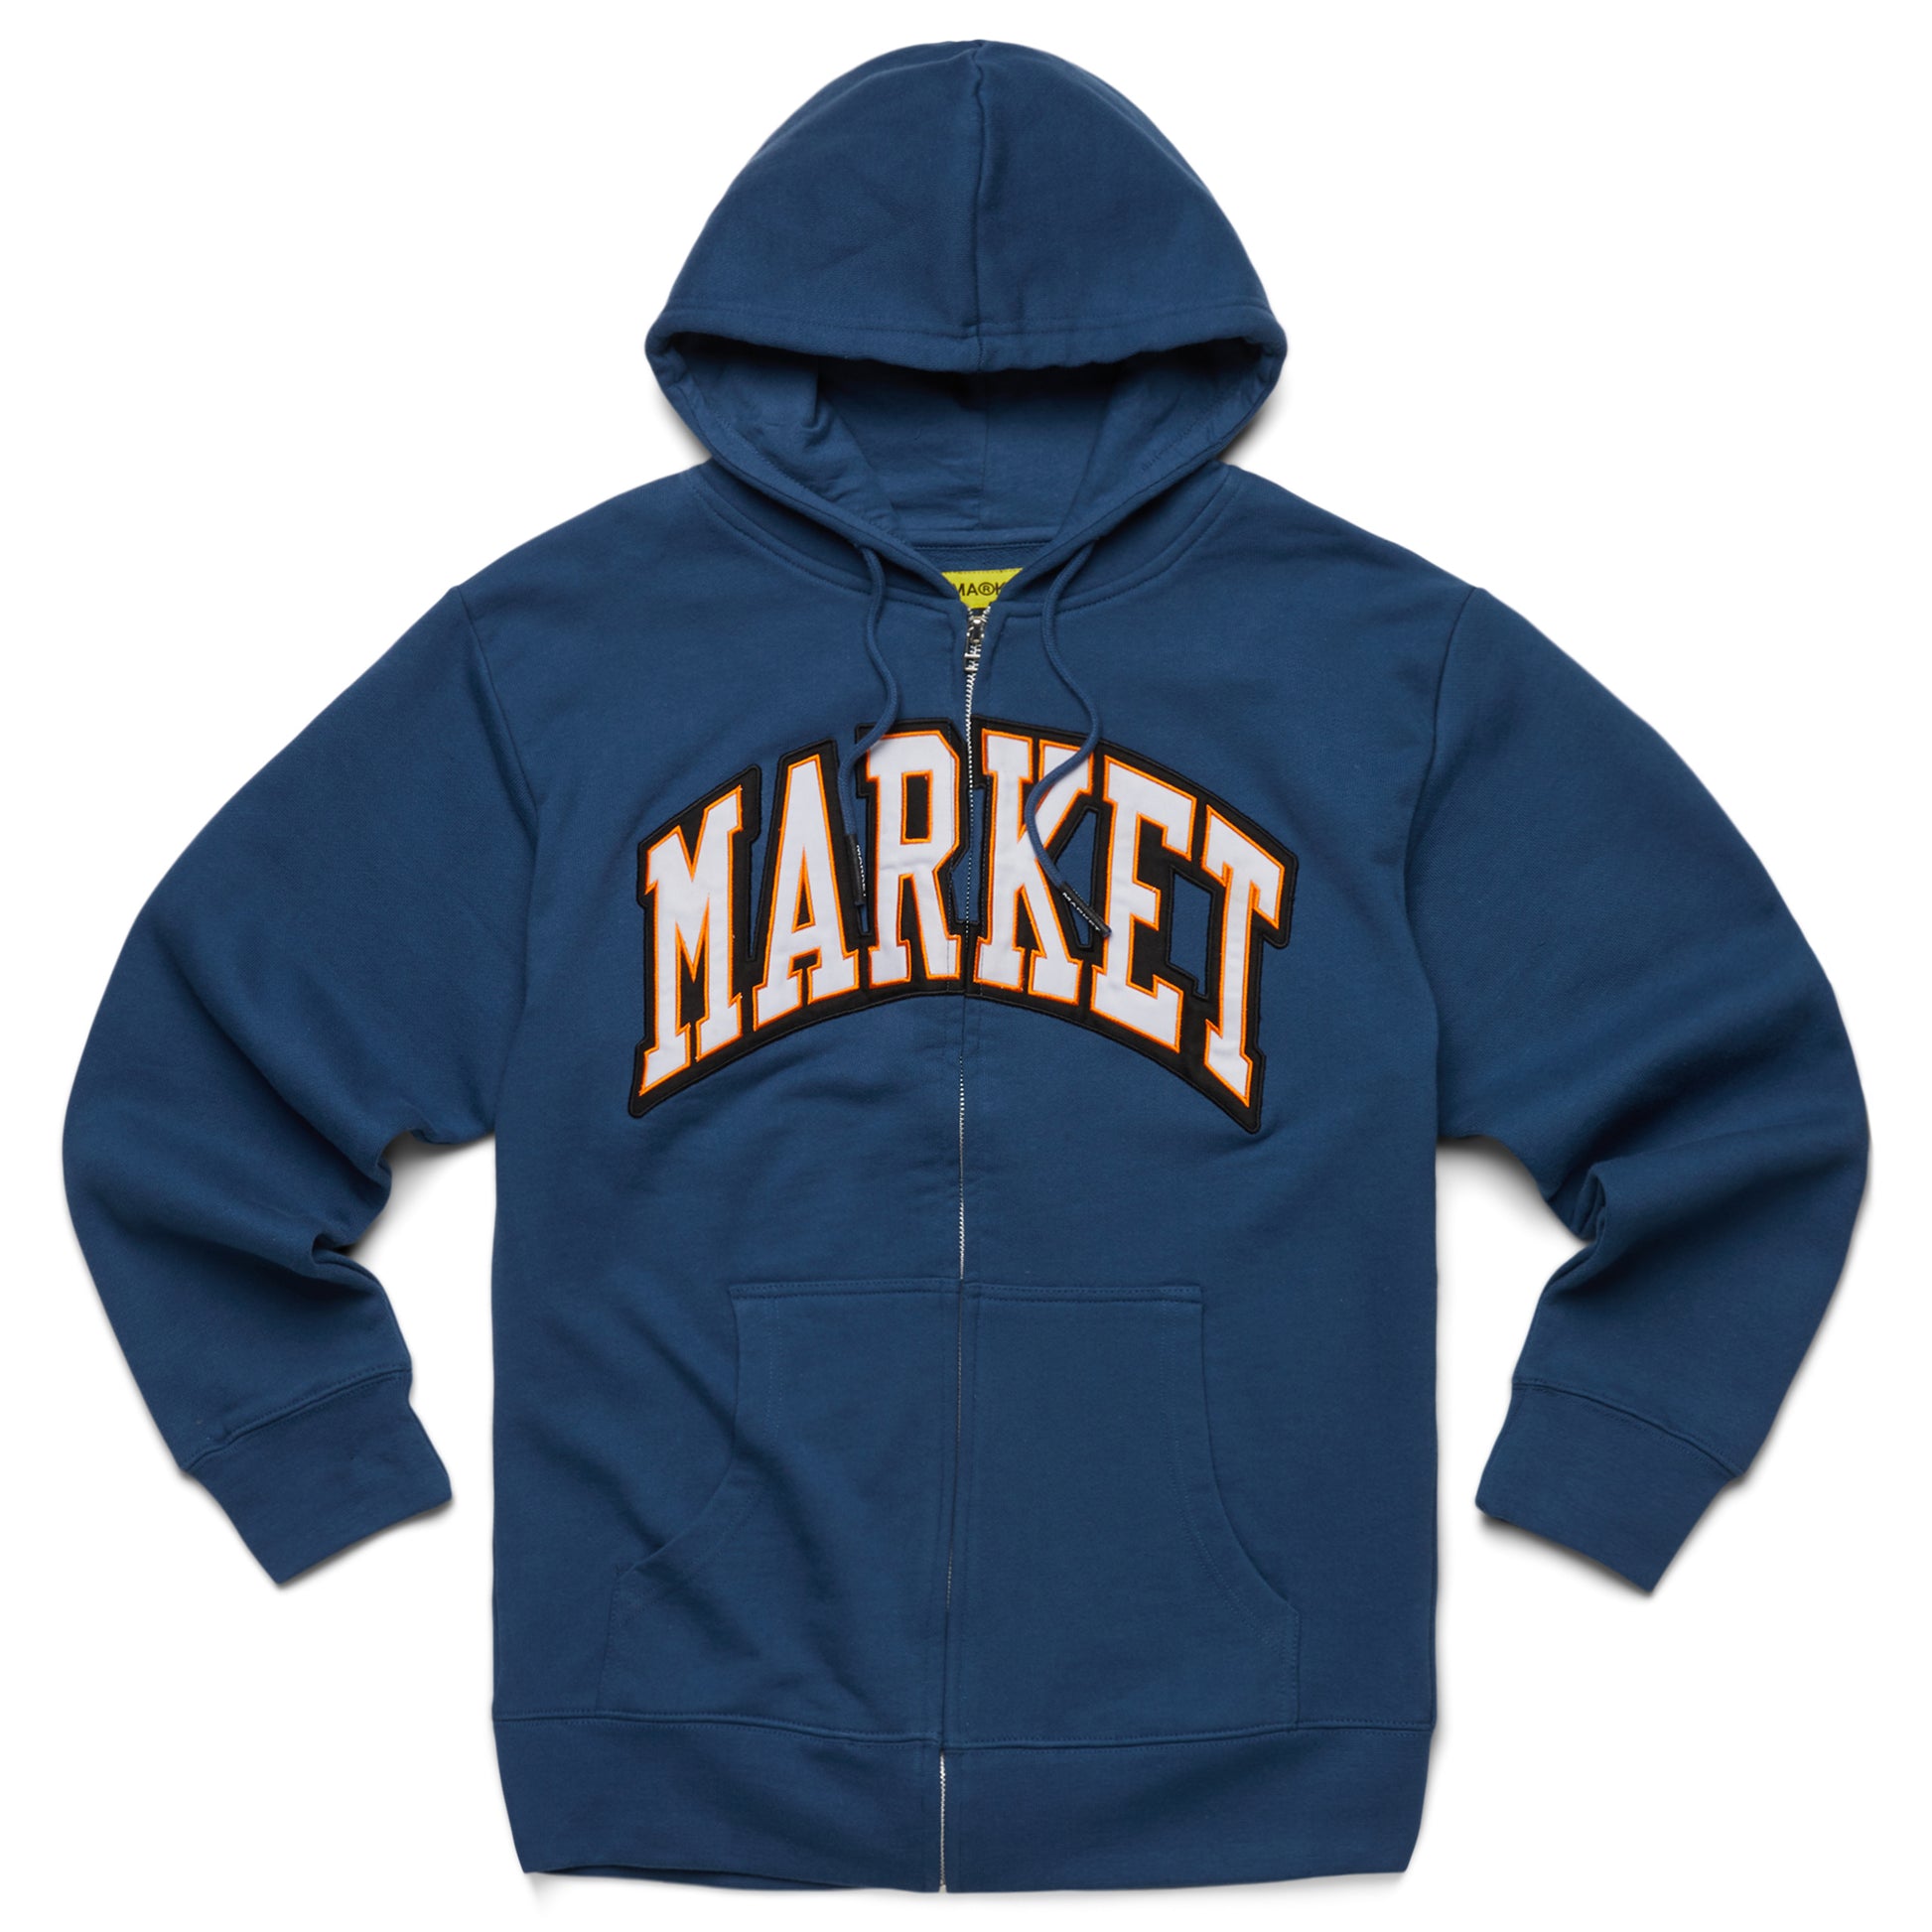 MARKET clothing brand MARKET ARC ZIP-UP HOODIE. Find more graphic tees, hats and more at MarketStudios.com. Formally Chinatown Market.